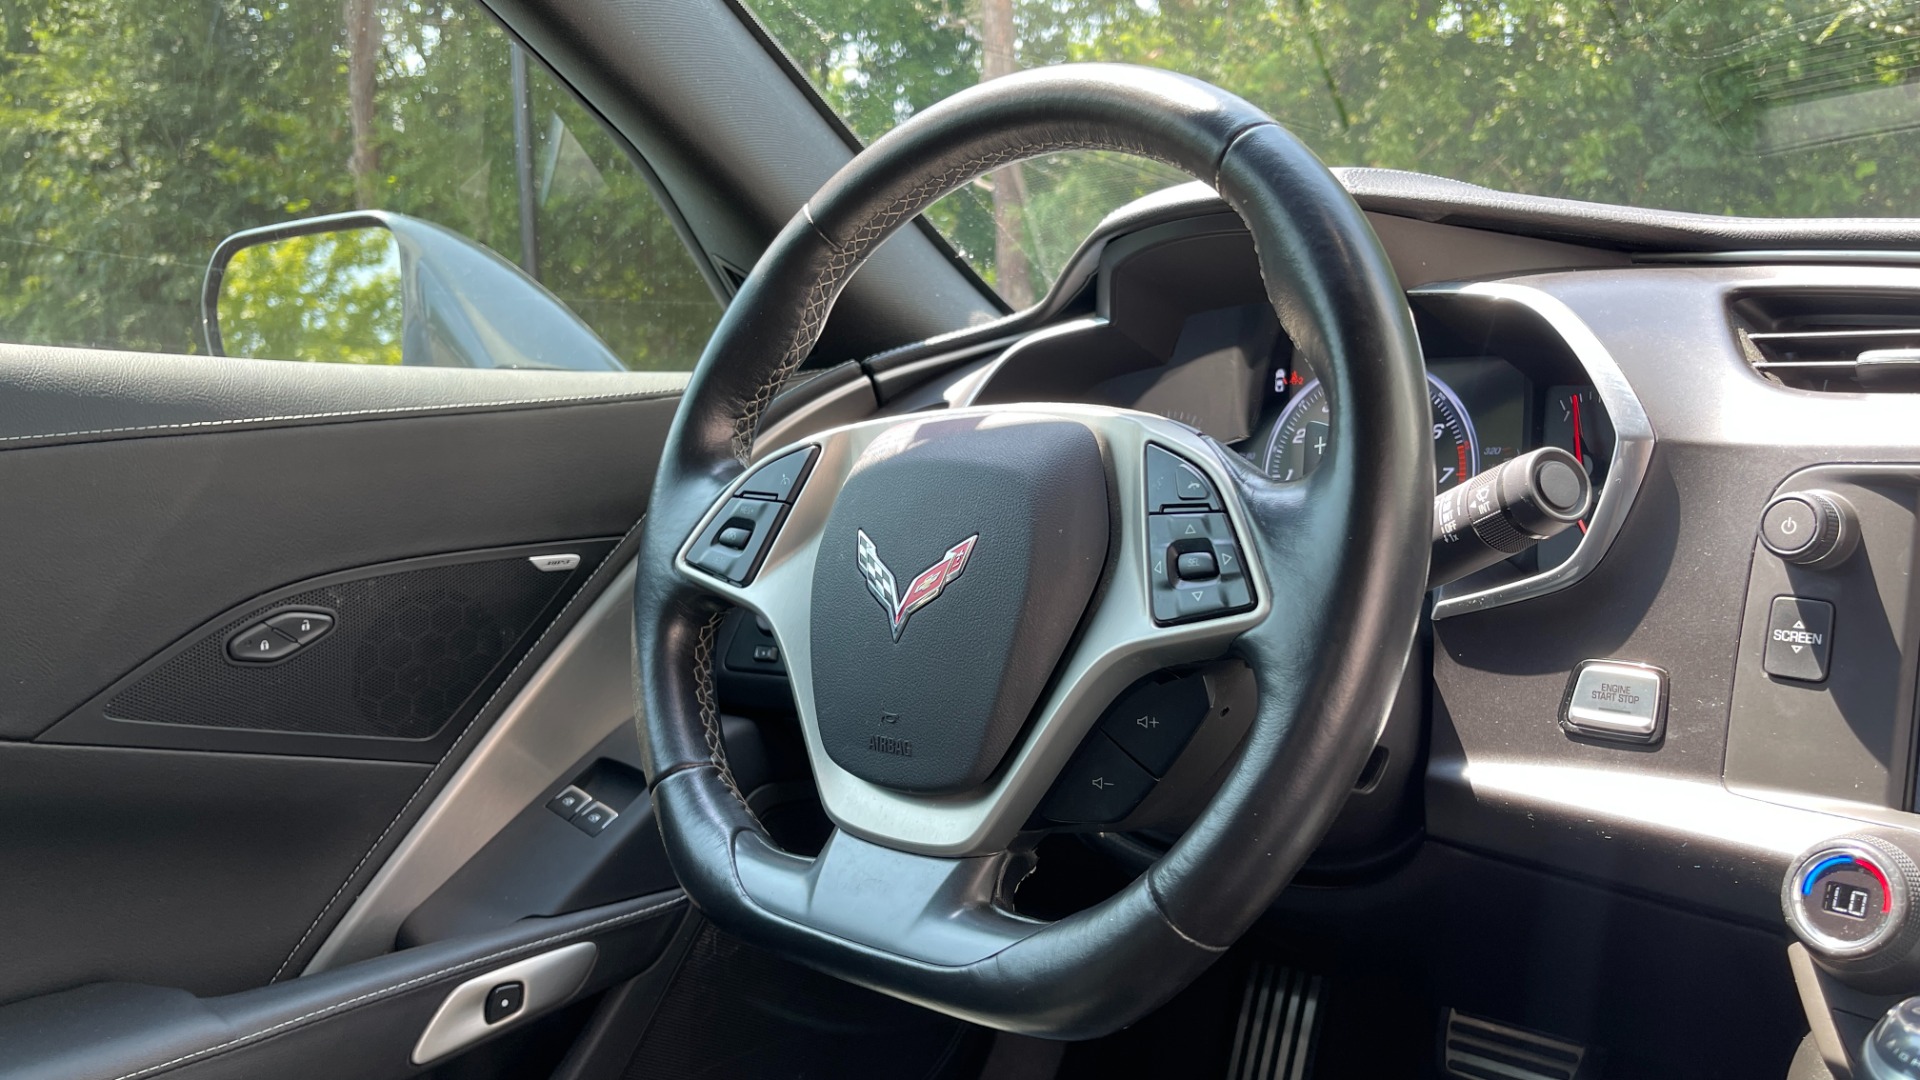 Used 2017 Chevrolet Corvette 1LT / 8SPD AUTO / 6.2L V8 / REMOTE START / PADDLE SHIFTERS for sale $52,995 at Formula Imports in Charlotte NC 28227 11